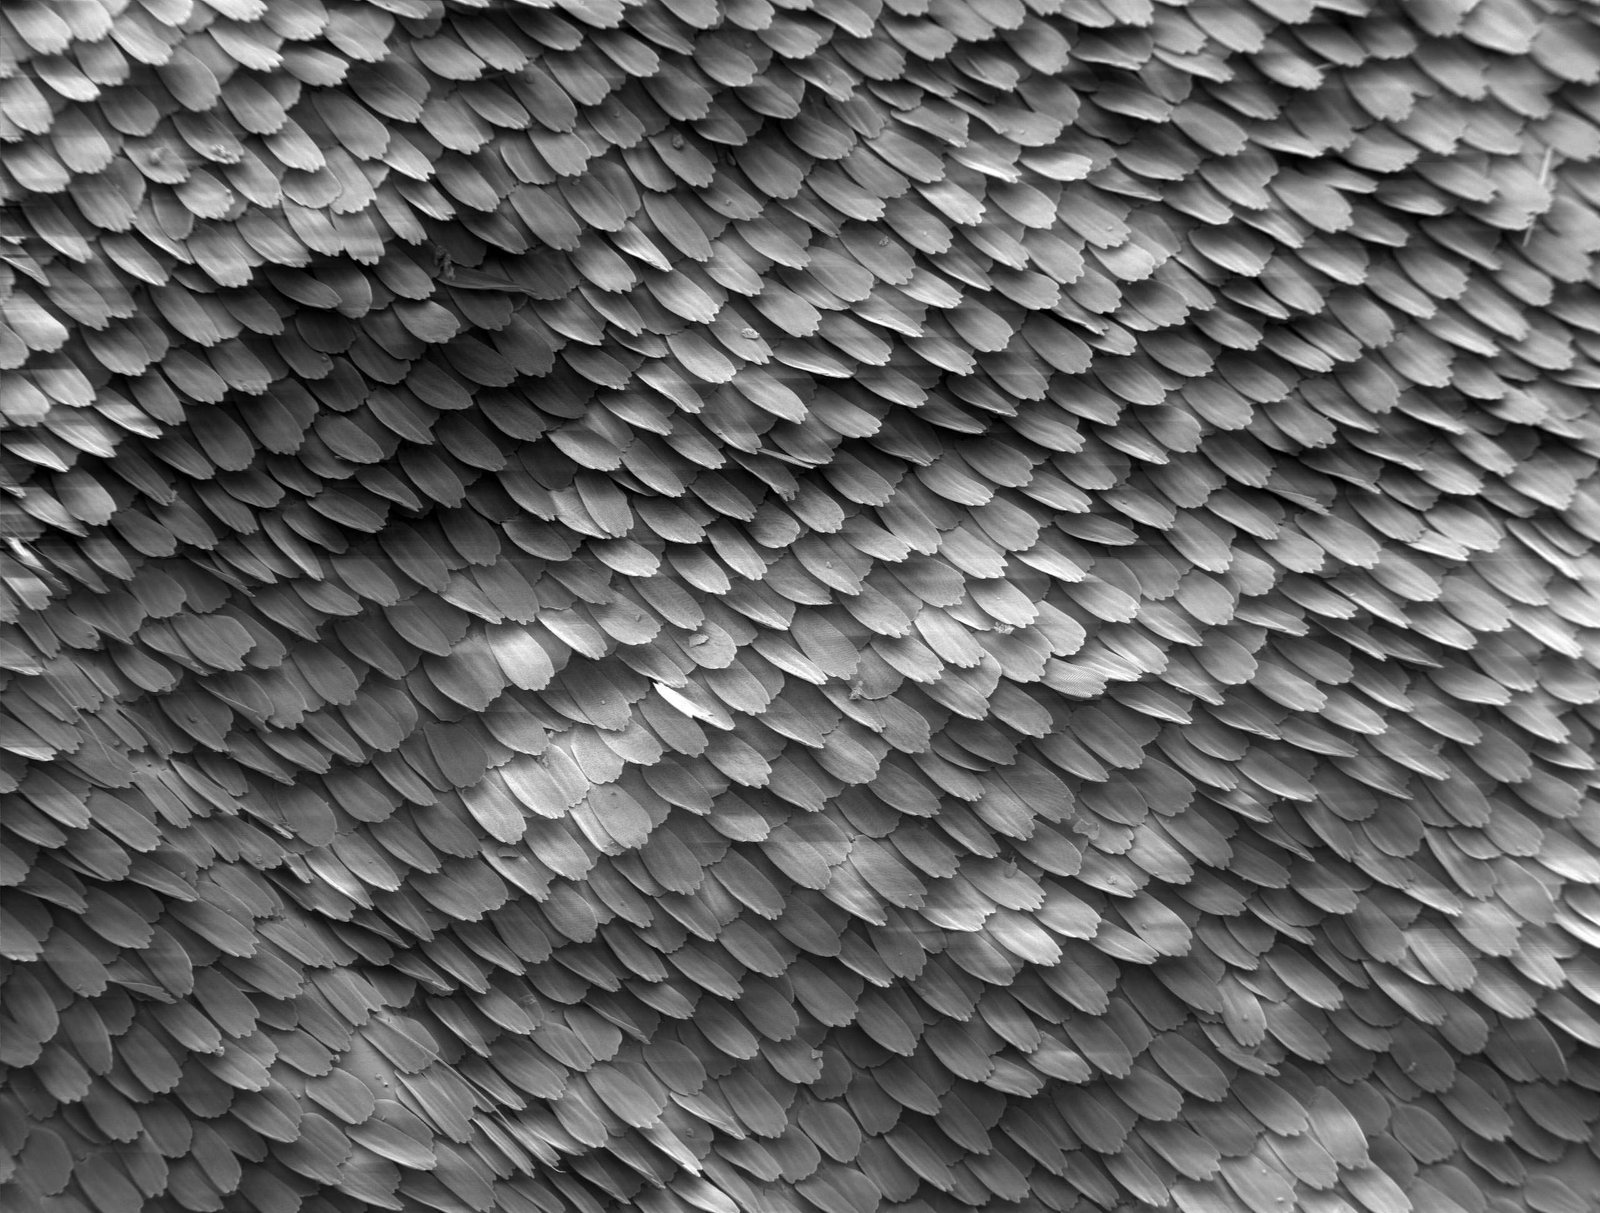 microscopic detail of Butterfly Wing